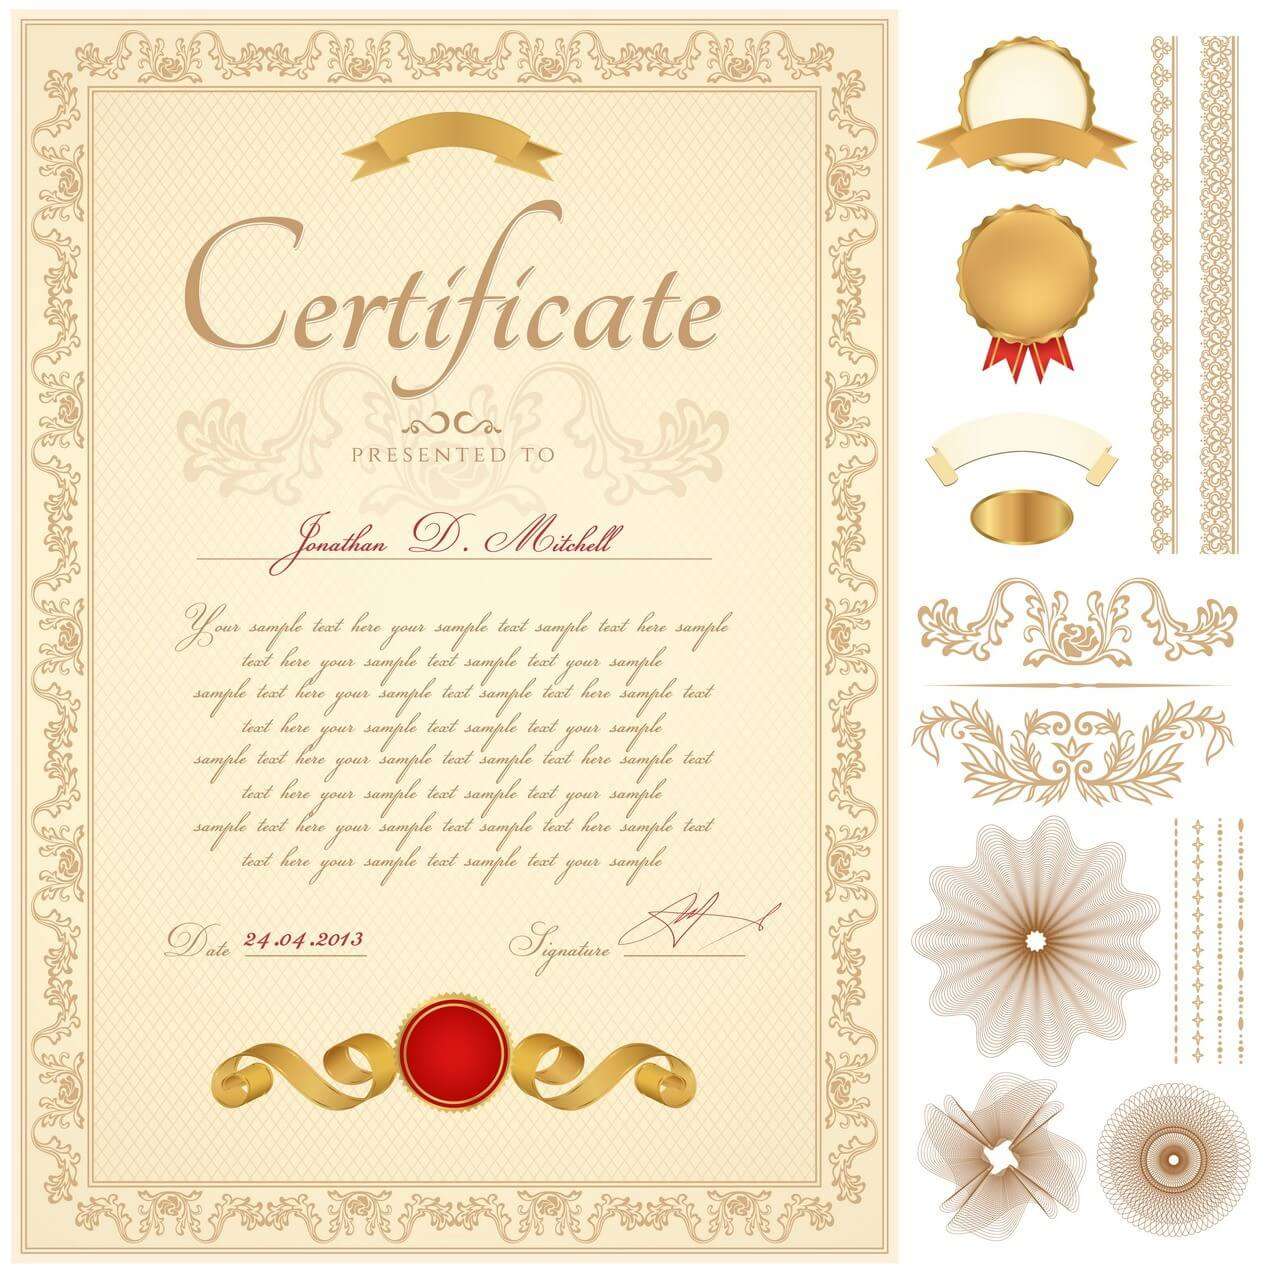 Certificate Template 03 png